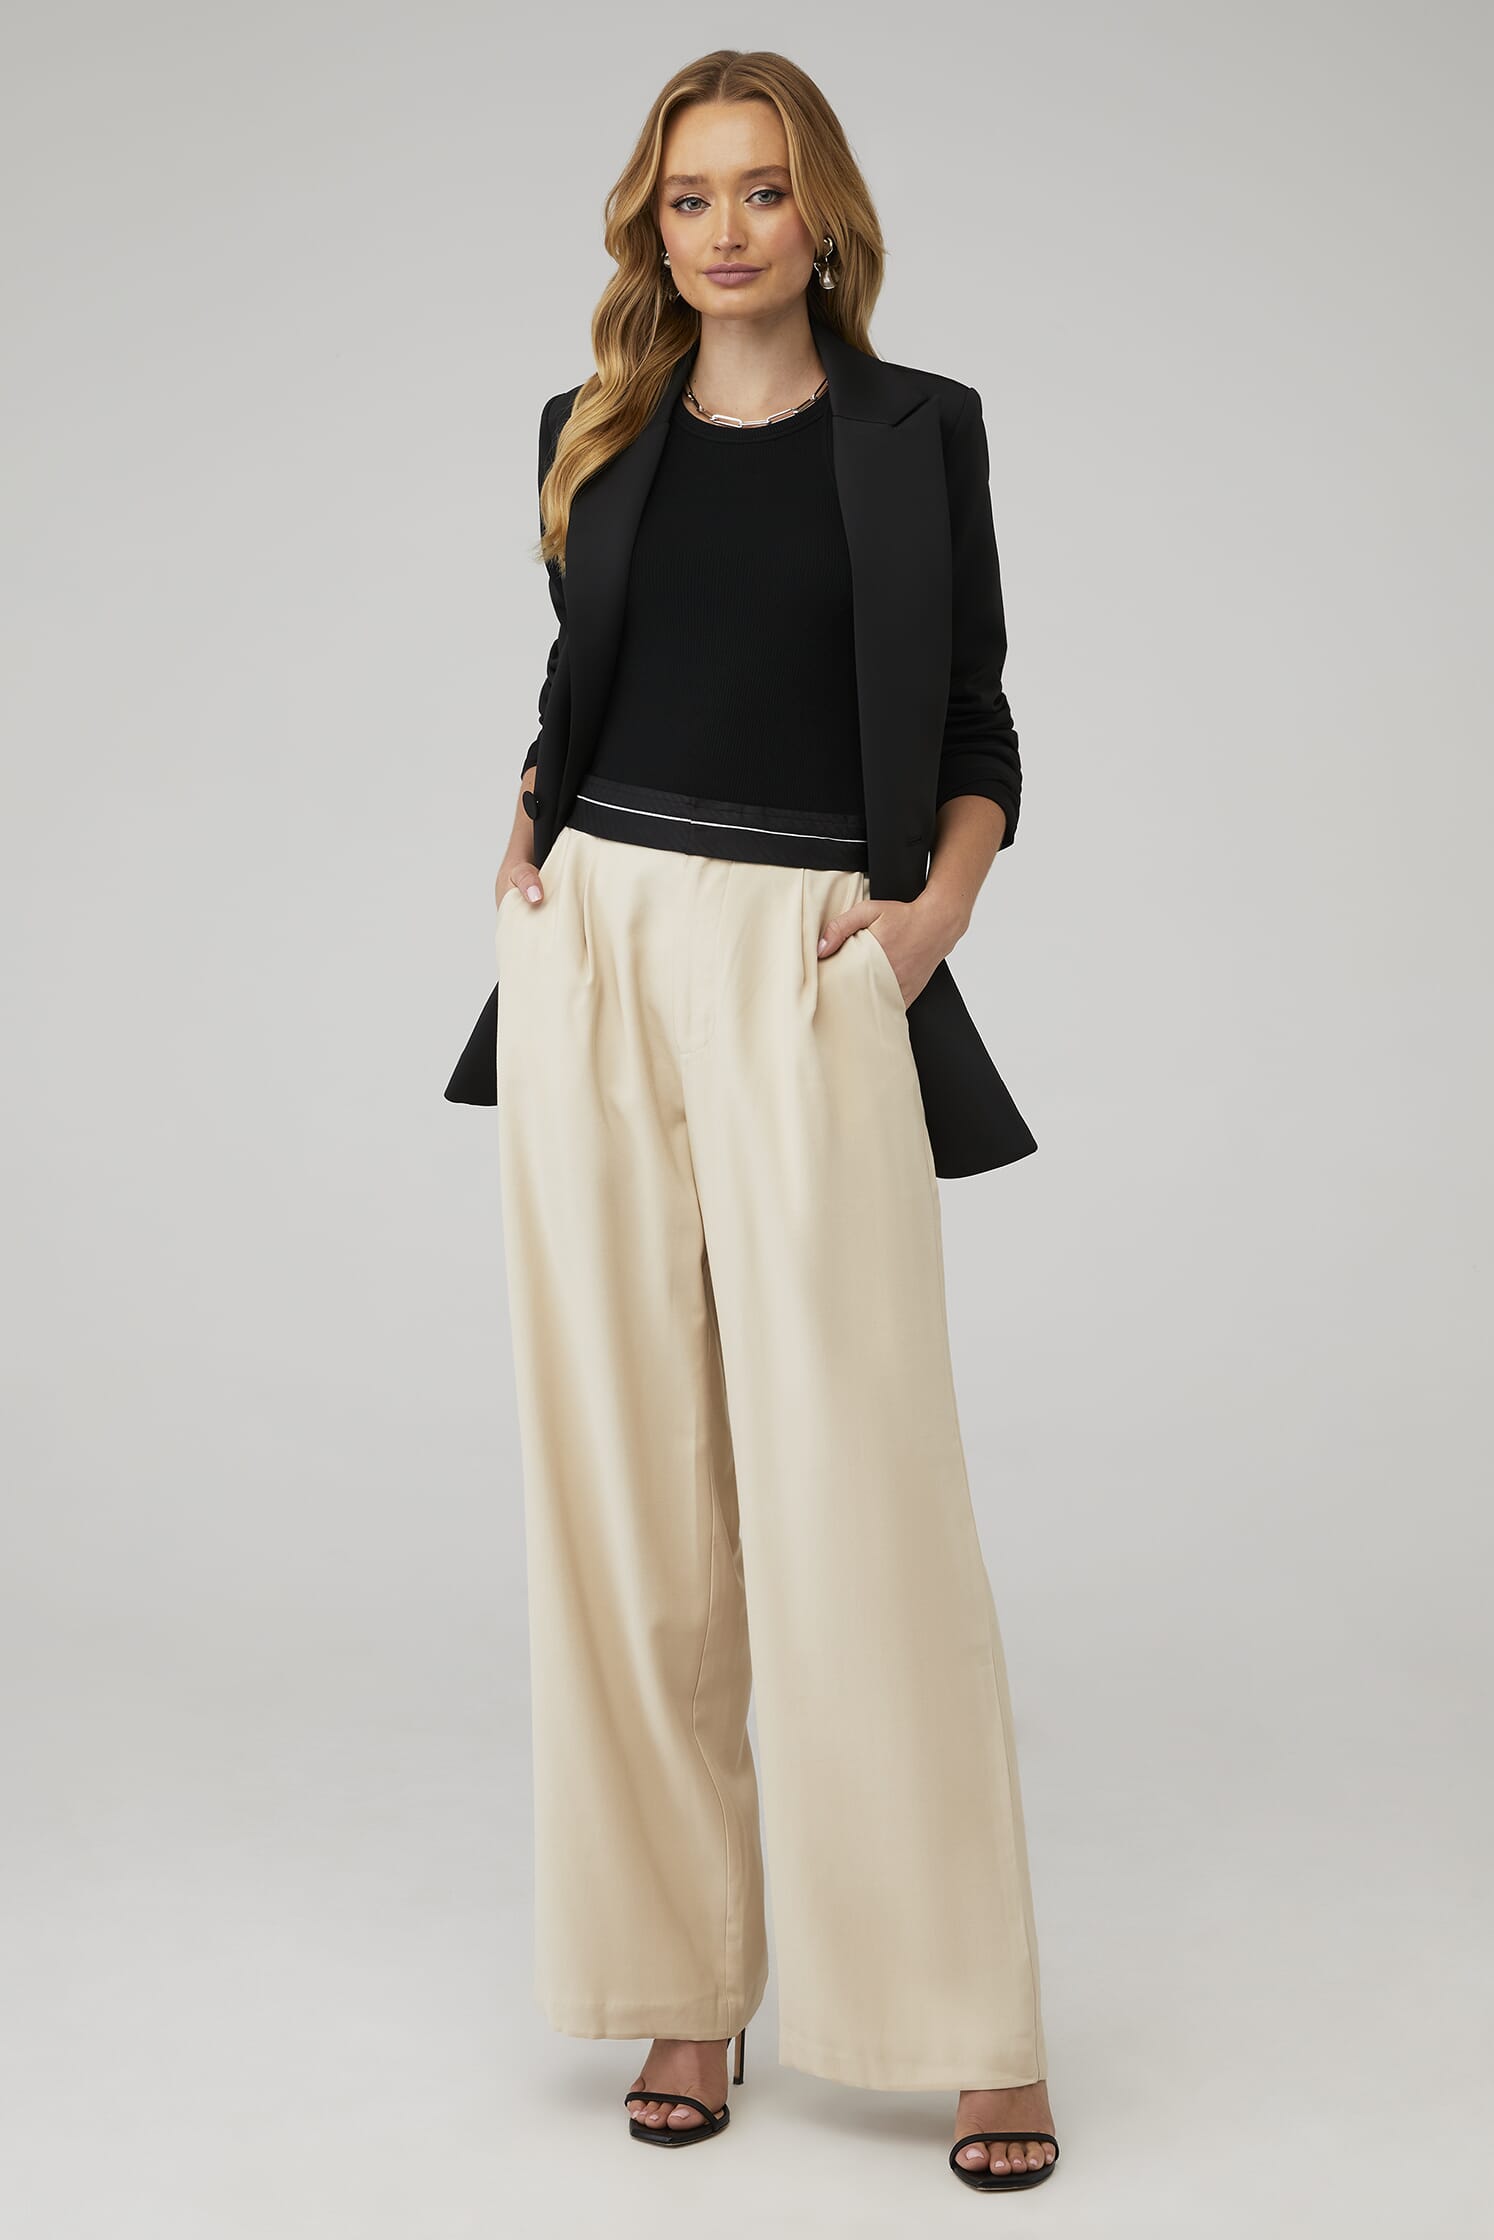 REBECCA Sequin Flare High-Waisted Pants